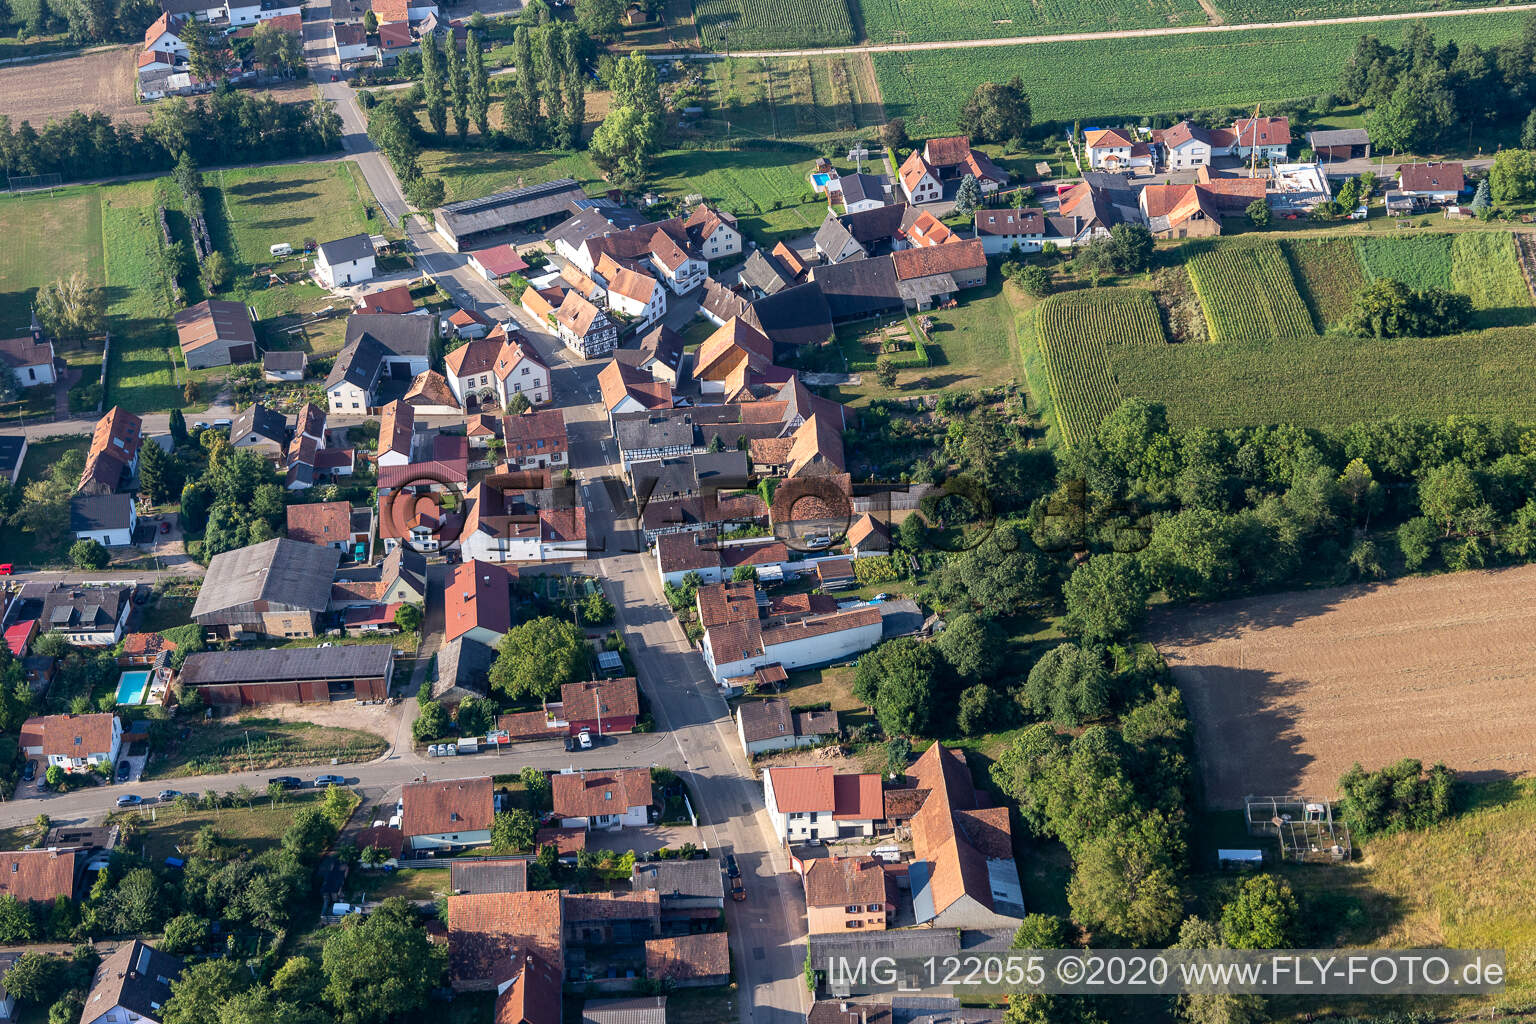 Drone recording of Niederotterbach in the state Rhineland-Palatinate, Germany